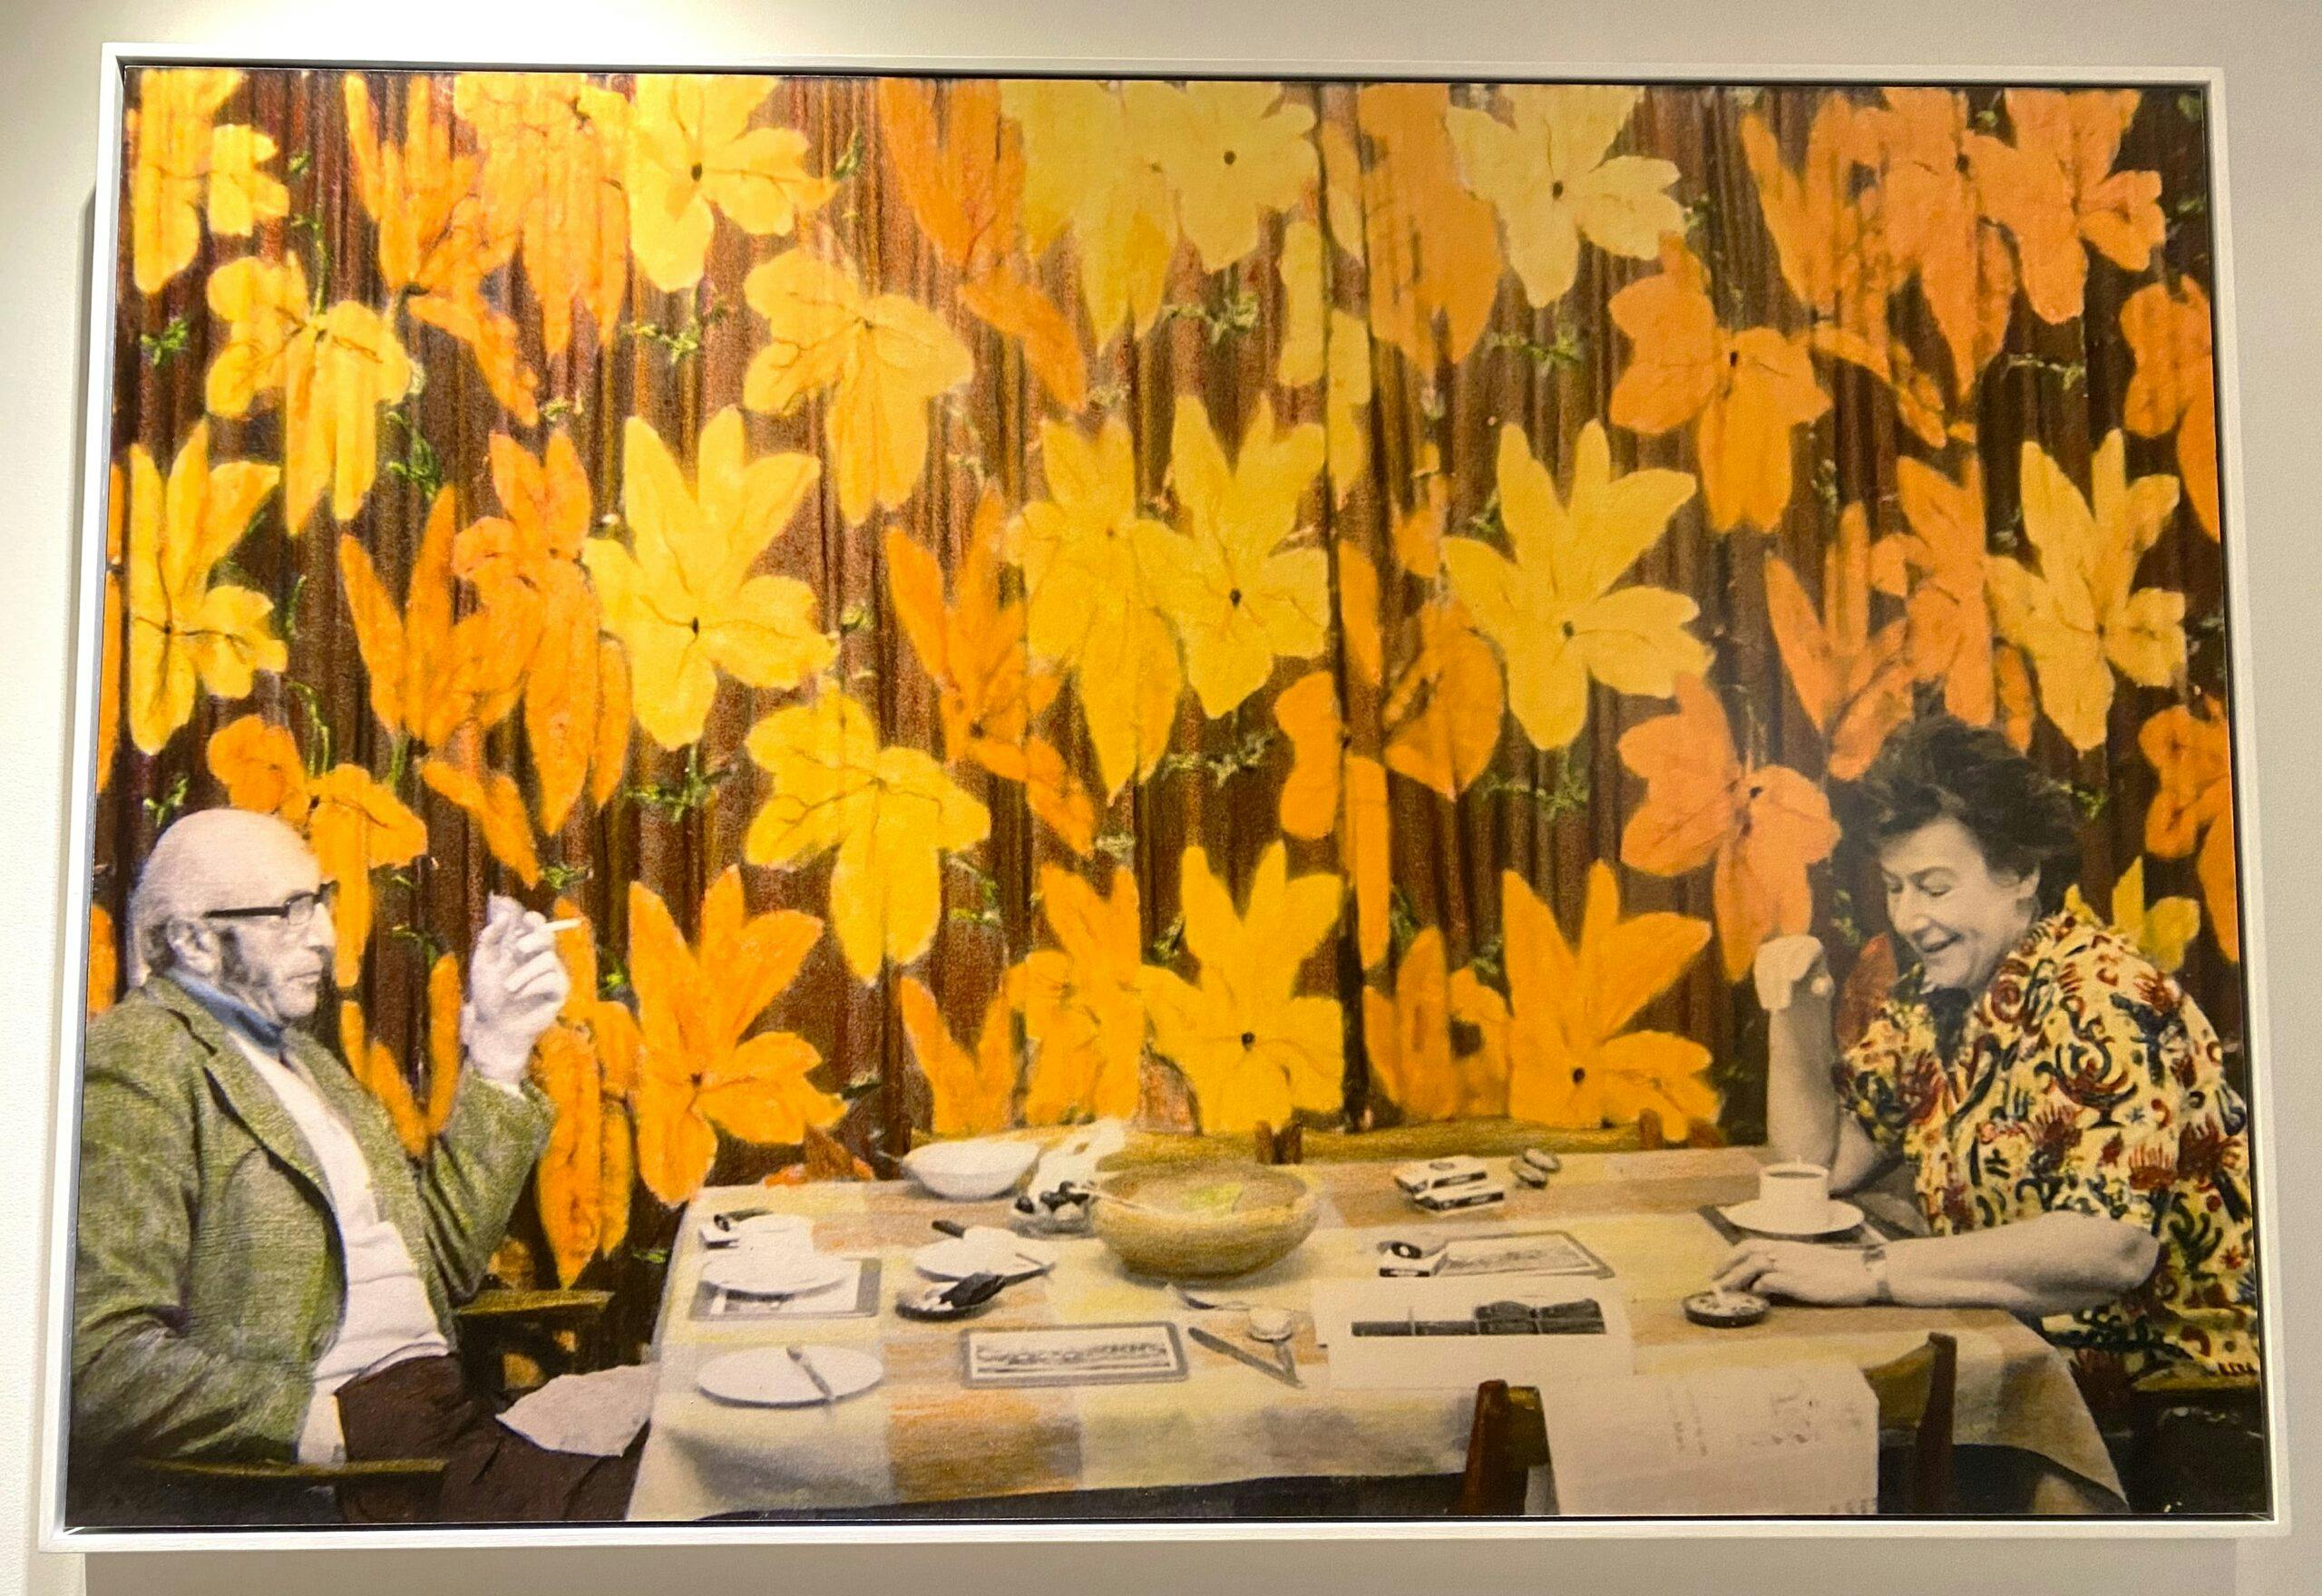 A painting showing an old married couple at a kitchen table with orange, yellow and brown flowers in the background